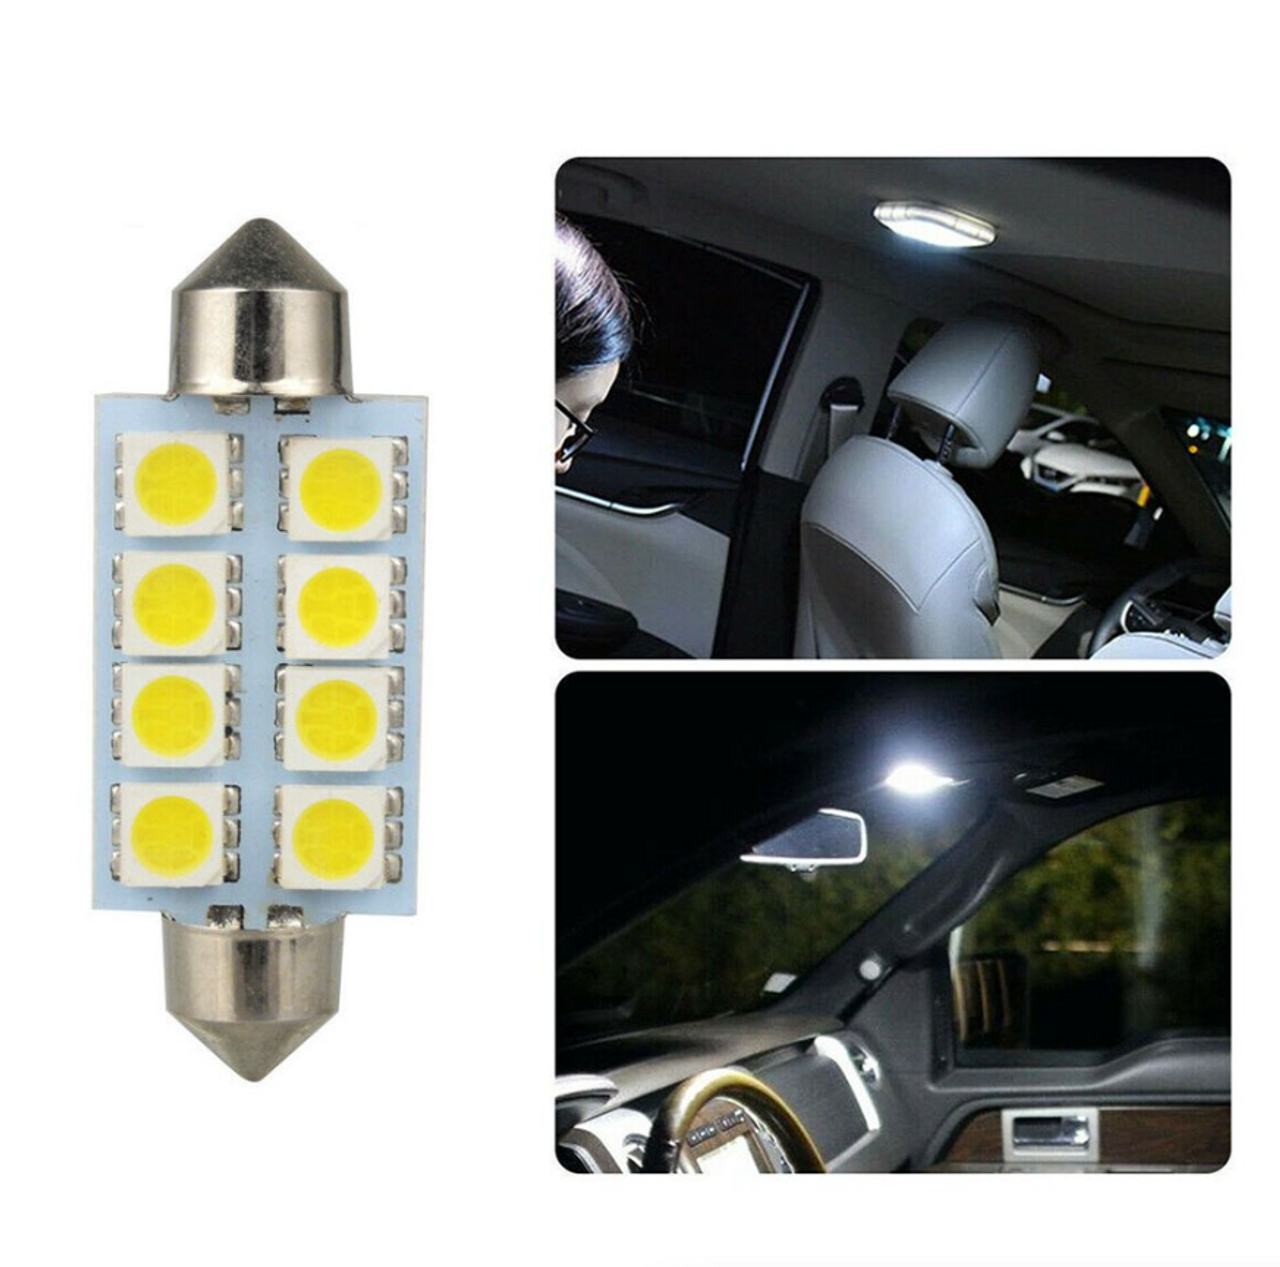 14Pcs T10 36mm LED Interior Car Accessories Kit Map Dome License Plate Lights